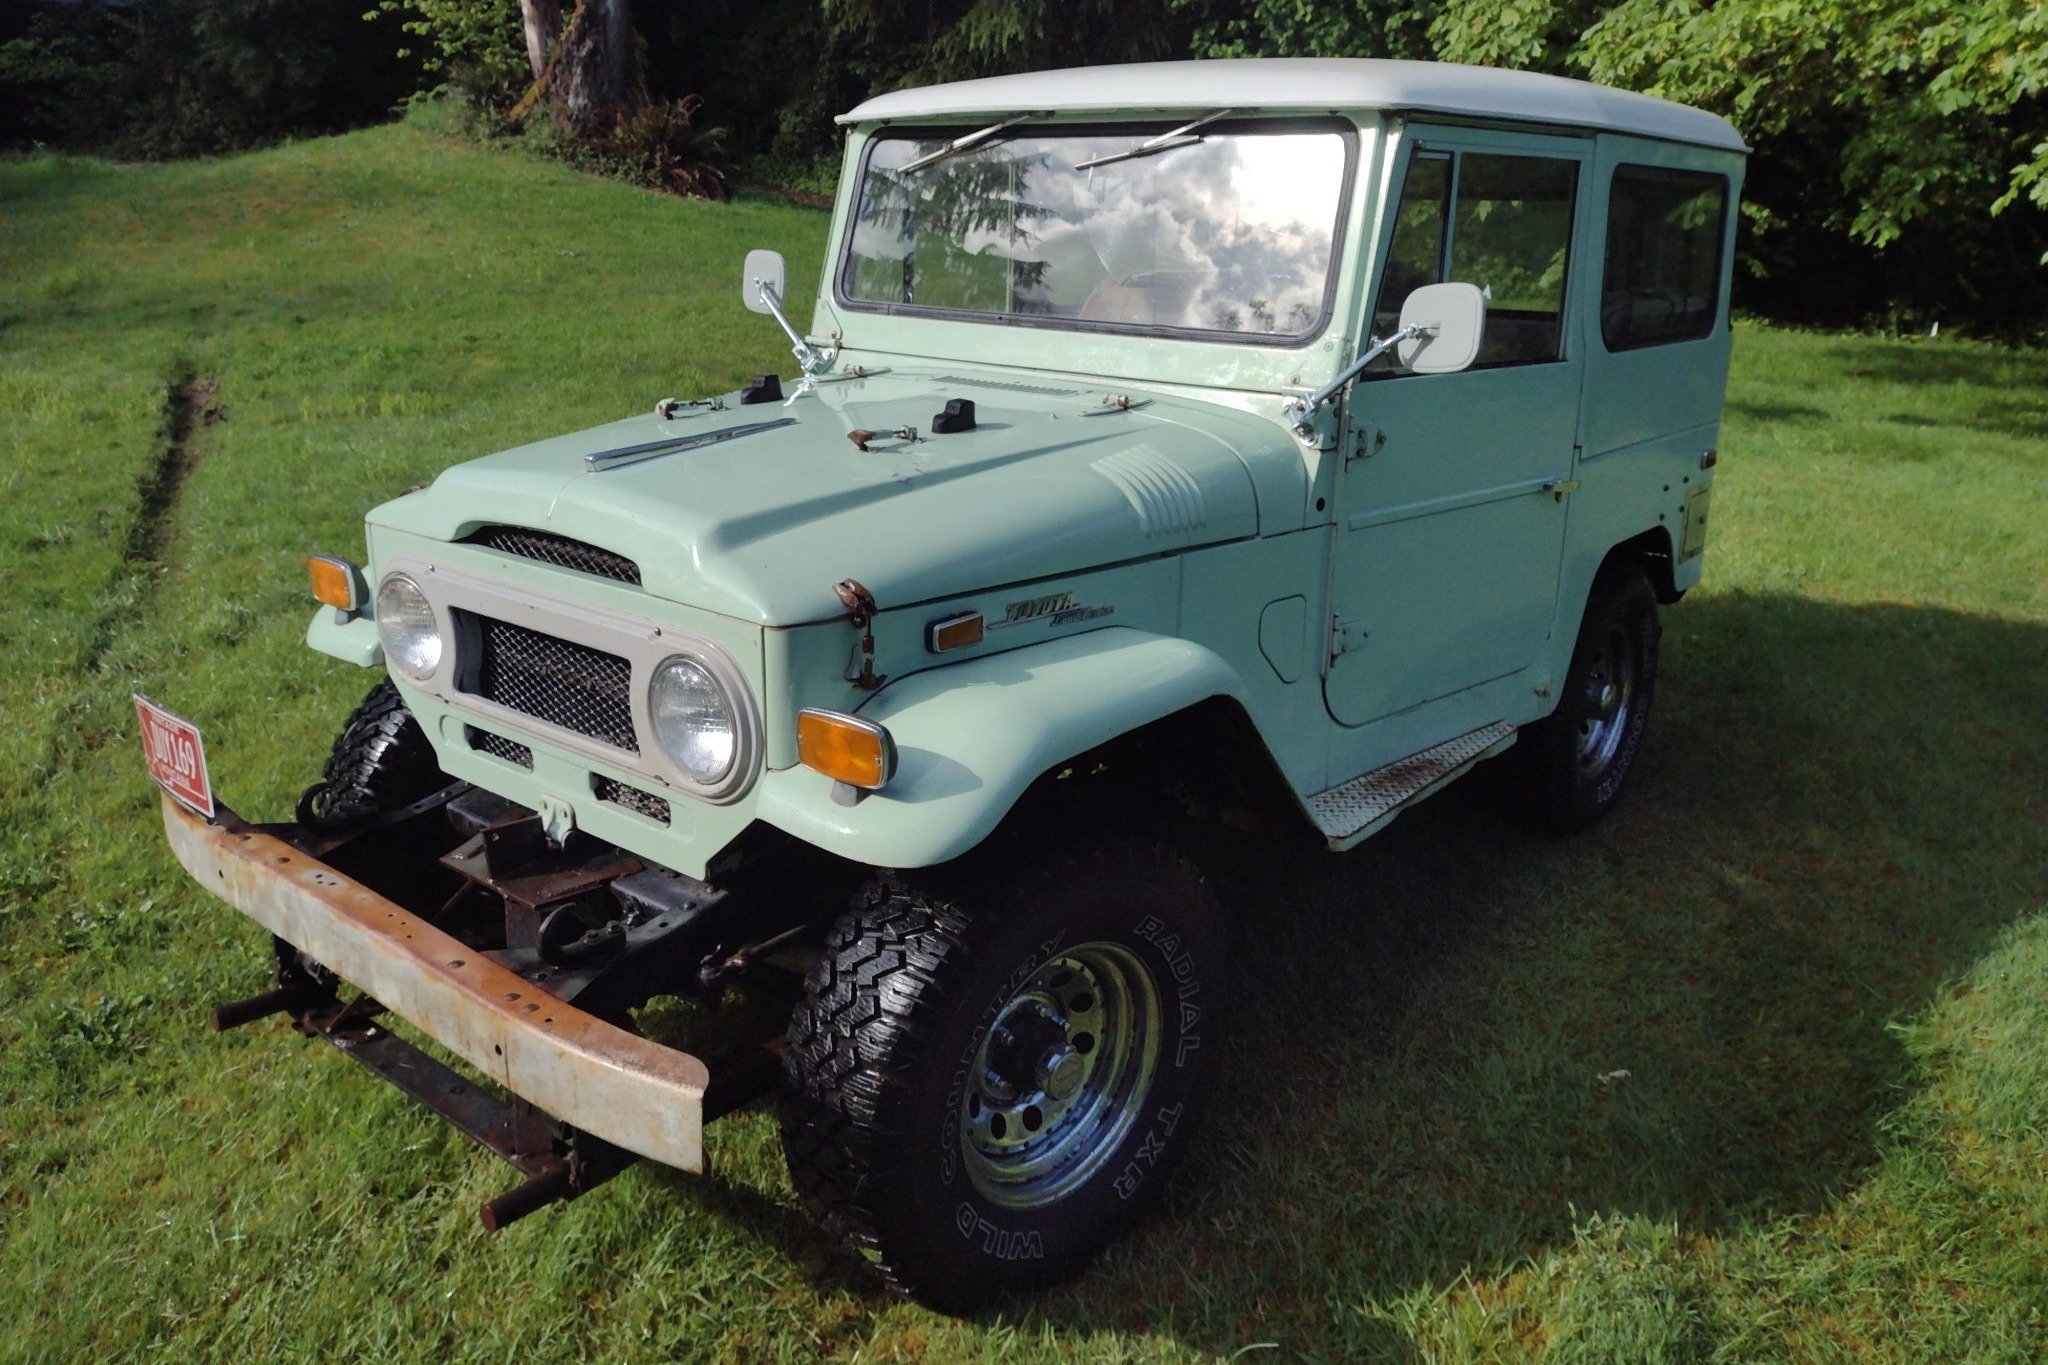 Used 1971 Toyota Land Cruiser FJ40 Review